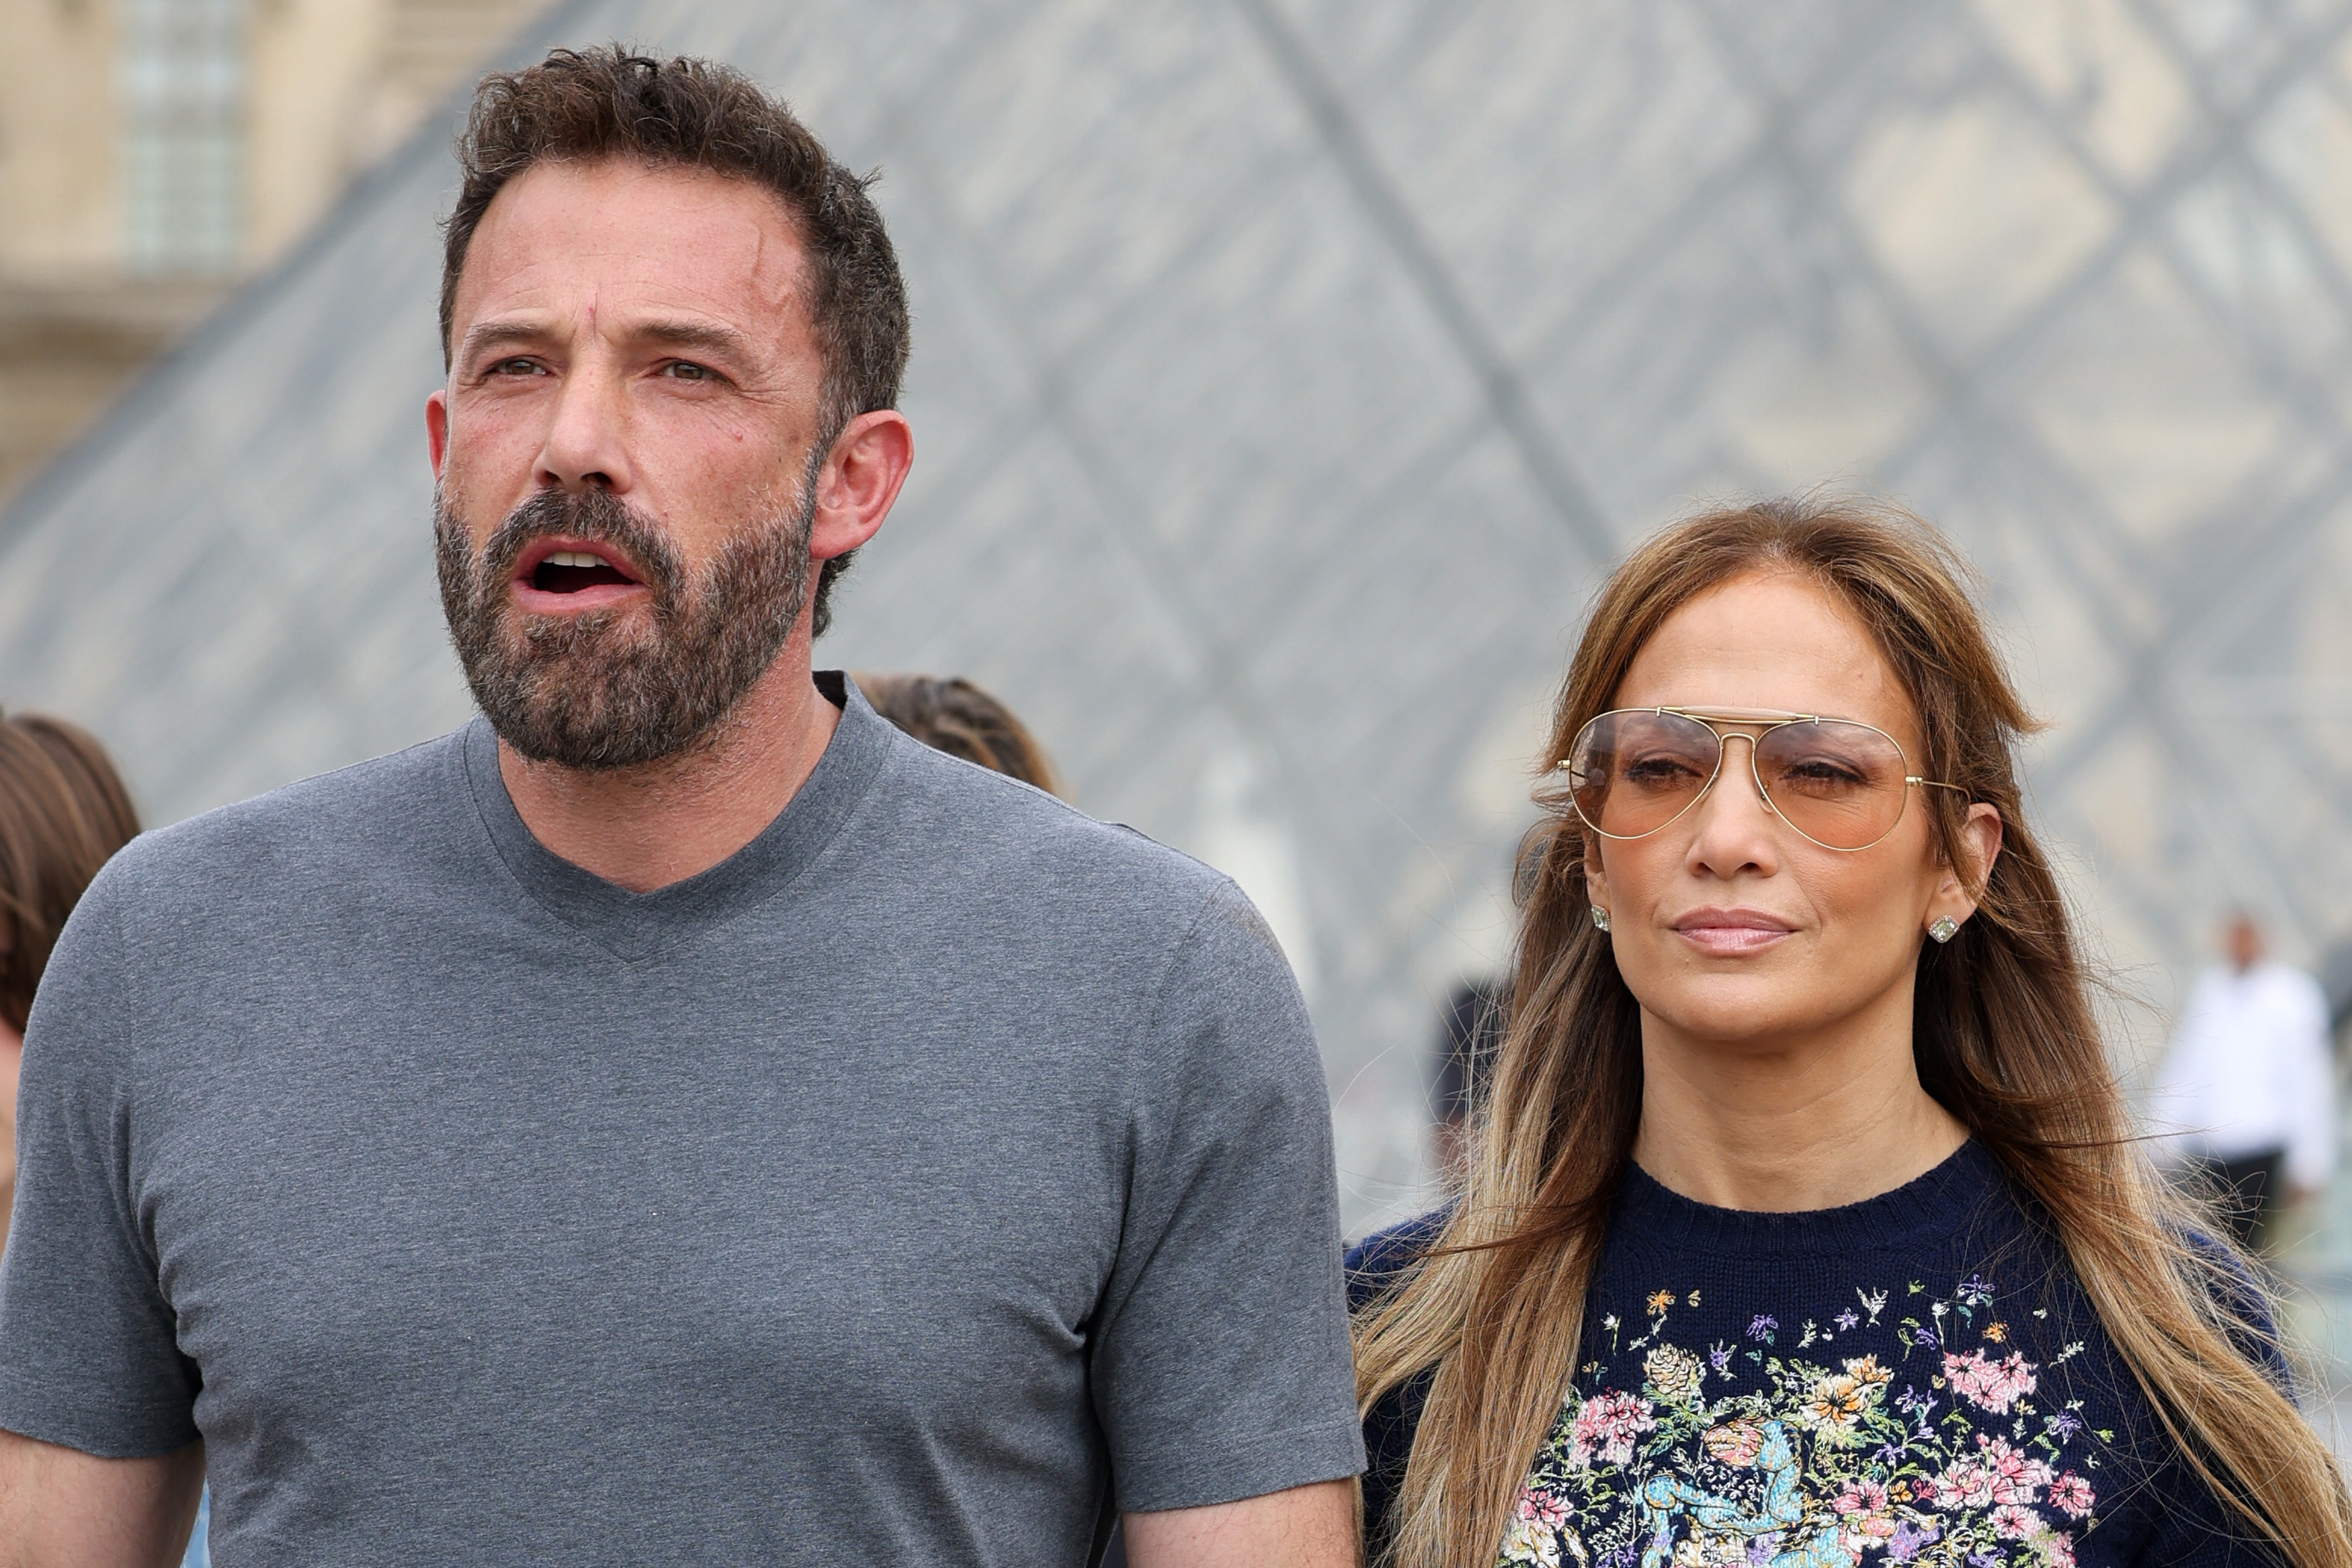 Jennifer Lopez and Ben Affleck at the Louvre Museum on July 26, 2022 in Paris, France | Source: Getty Images